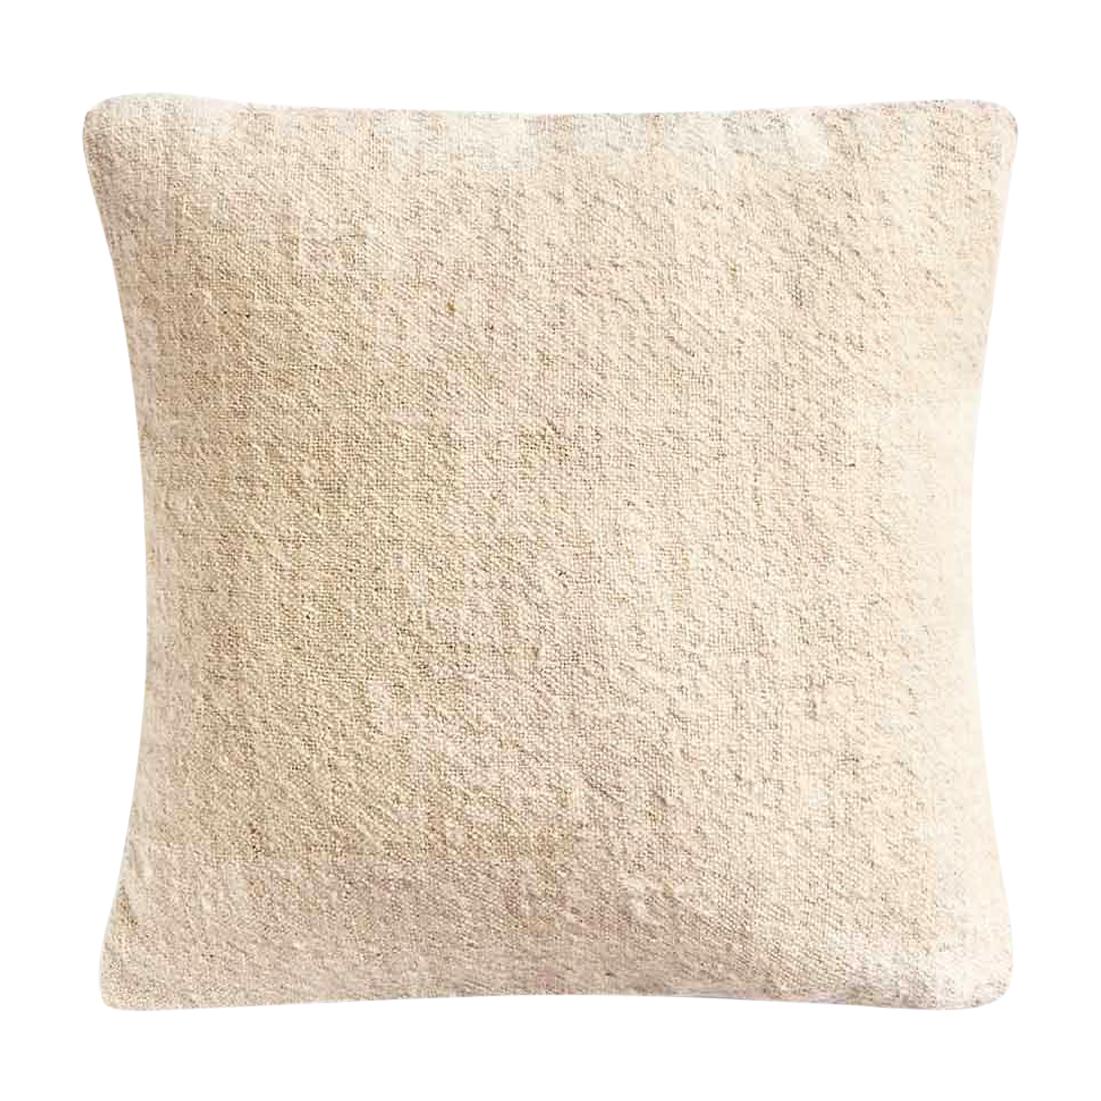 White Cushion Cover, made of Handspun and Handwoven wool